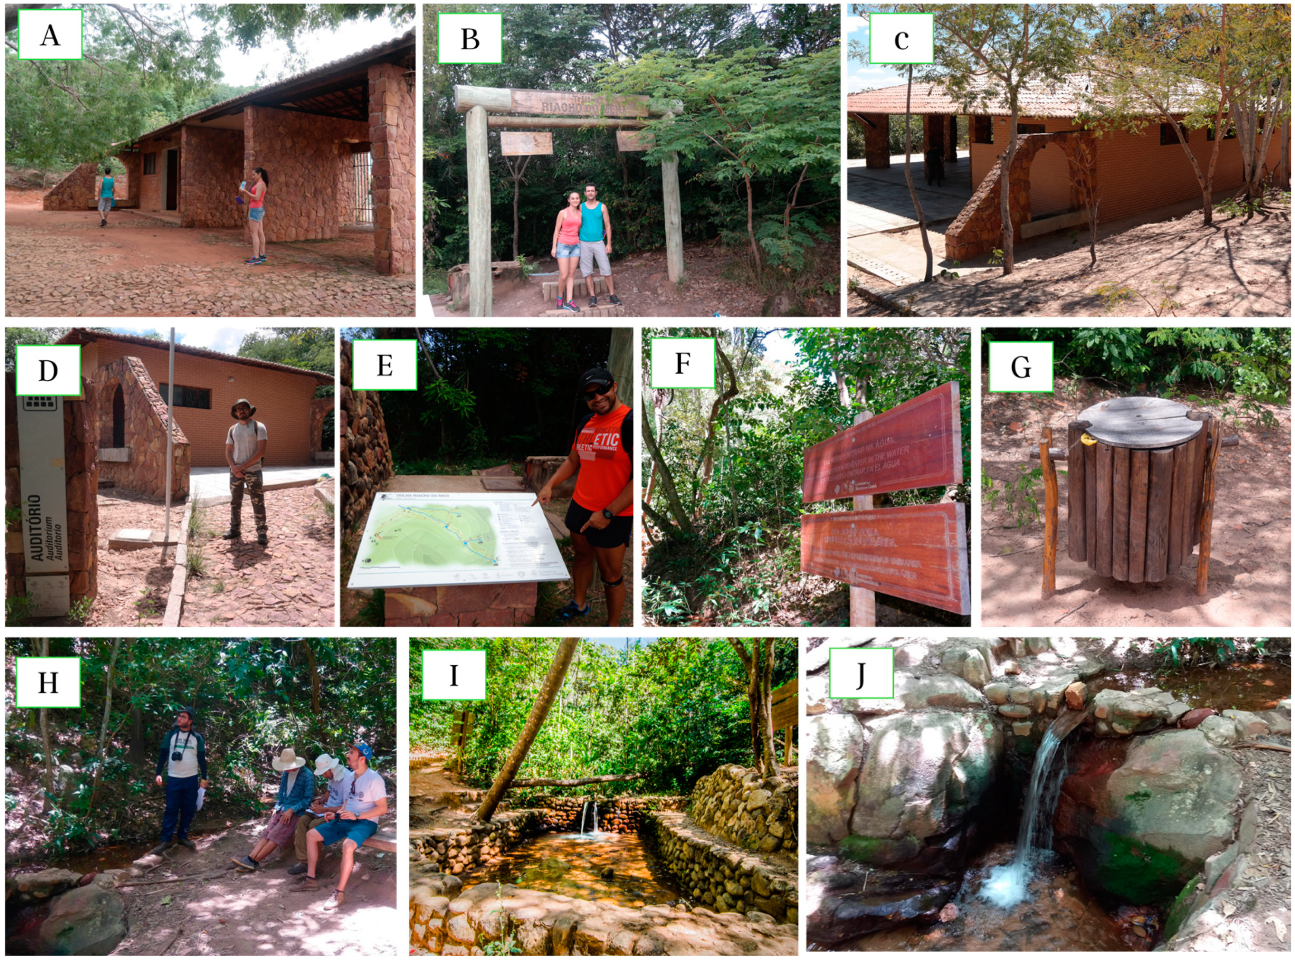 Geosciences Free Full Text A Network Perspective Of The Ecosystem S Health Provision Spectrum In The Tourist Trails Of Unesco Global Geoparks Santo Sepulcro And Riacho Do Meio Trails Araripe Ugg Ne